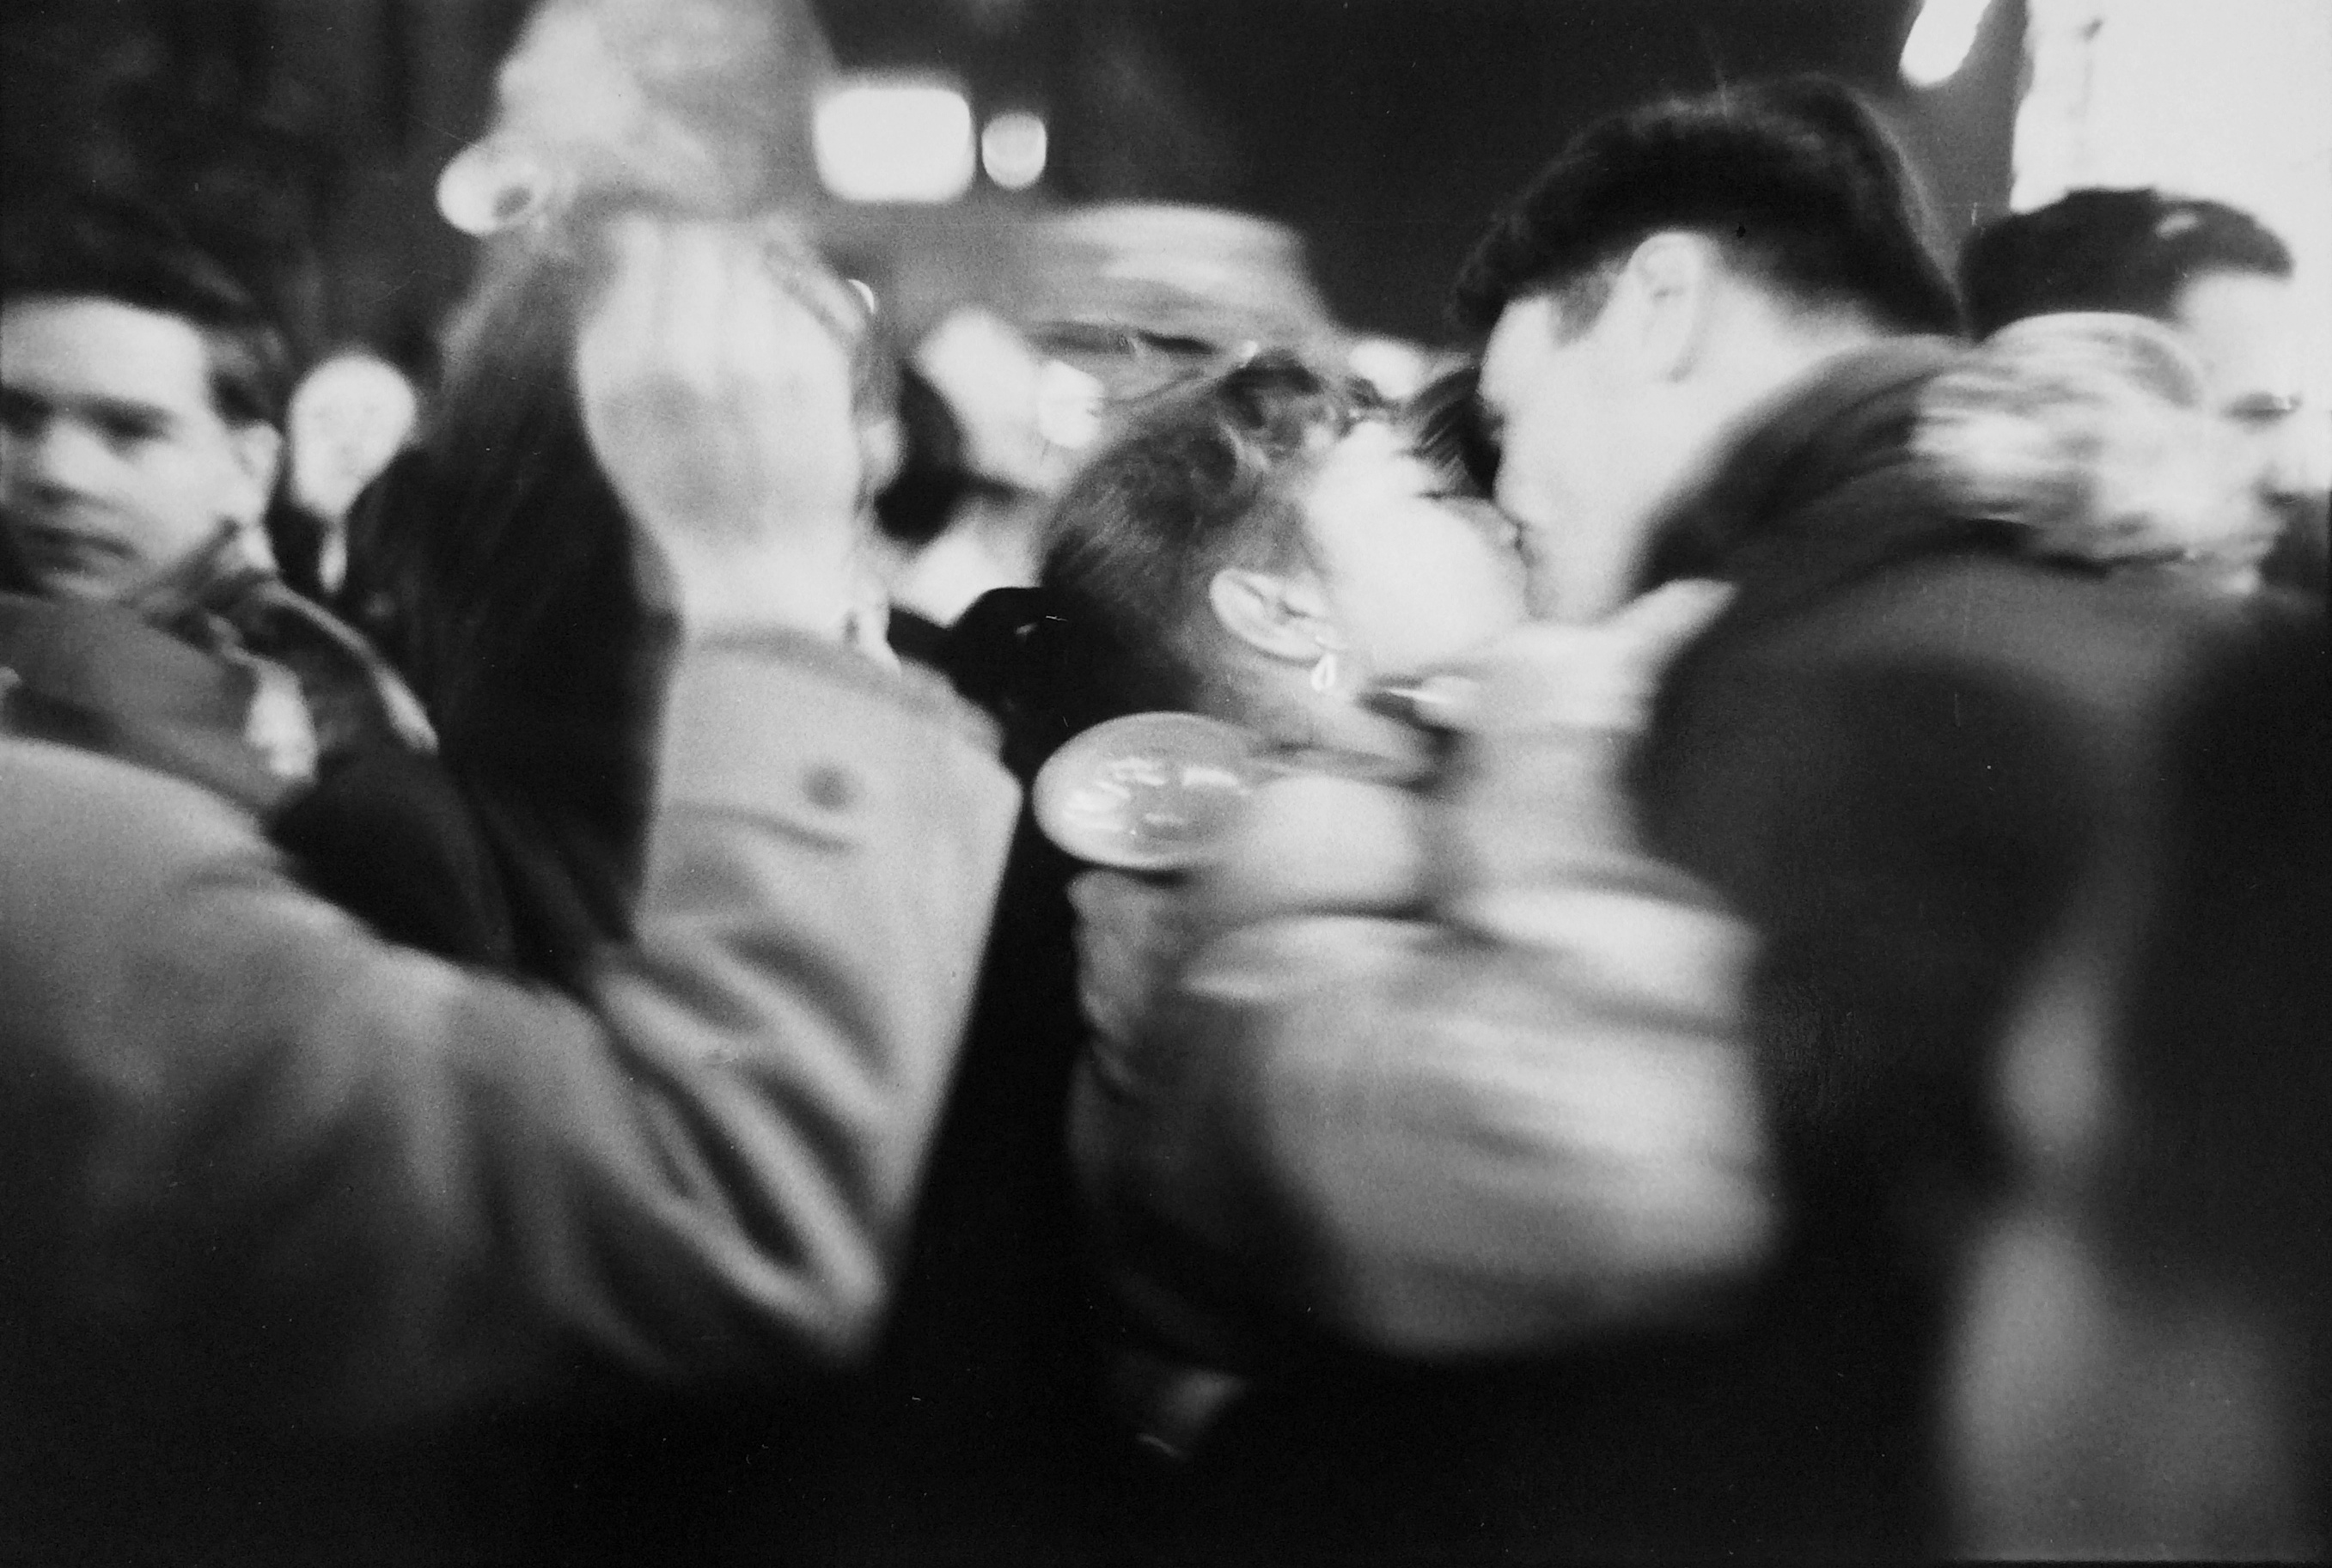 Saul Leiter, The Kiss, 1952
Saul Leiter, Kiss, 1952
Gelatin silver print 
27 x 25 cm 
Signed, captioned and dated by photographer verso